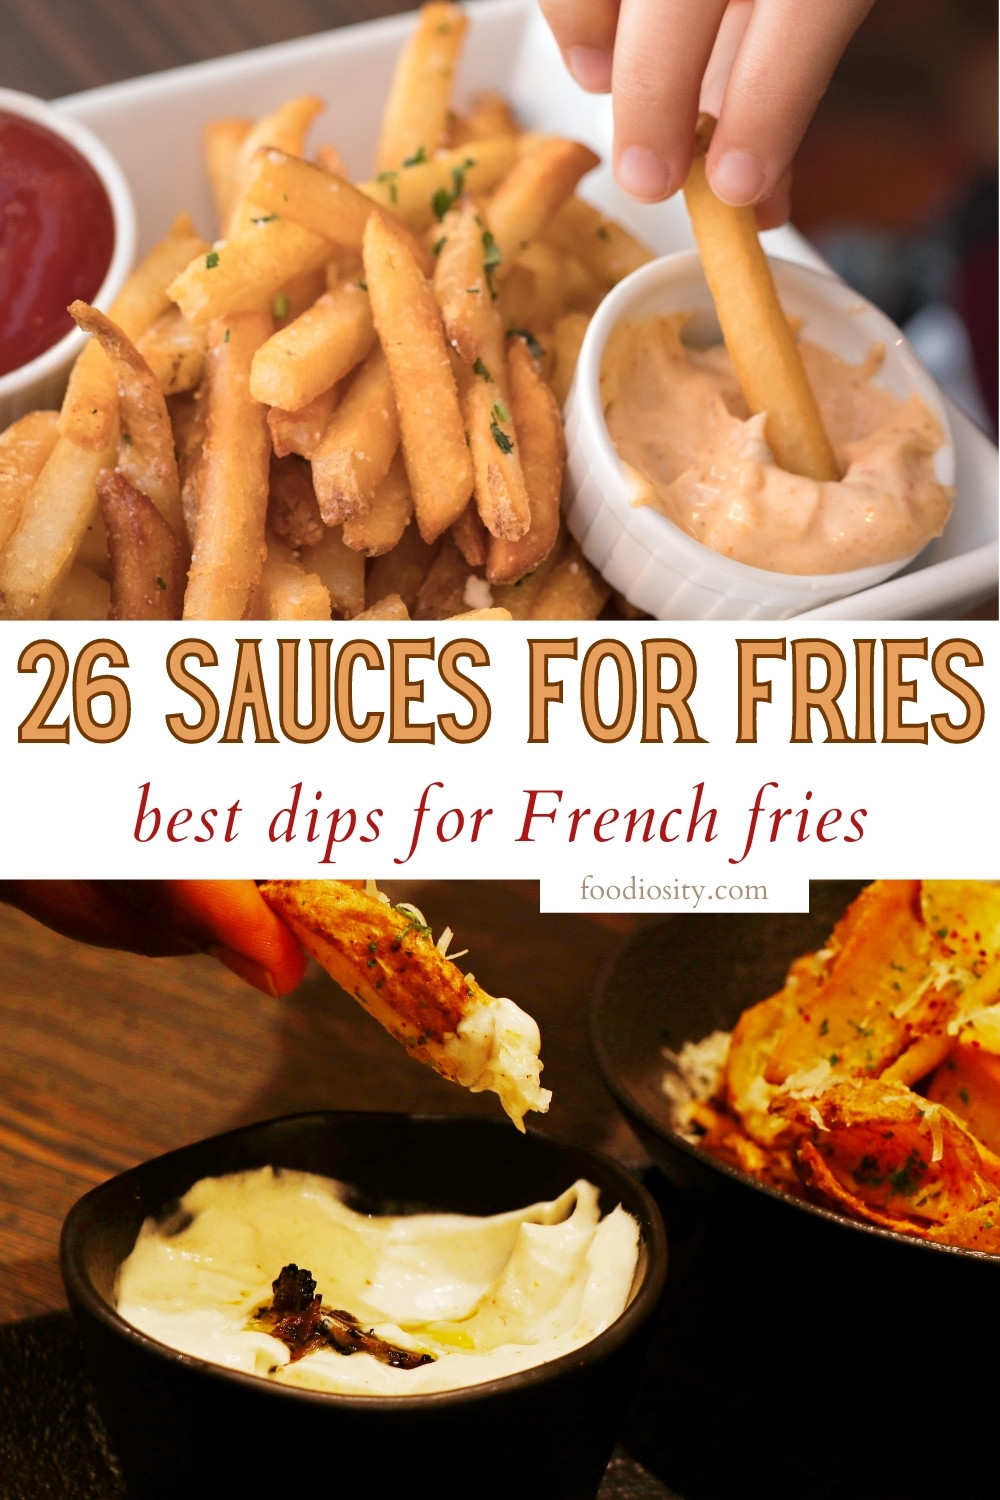 26 sauces for fries 1